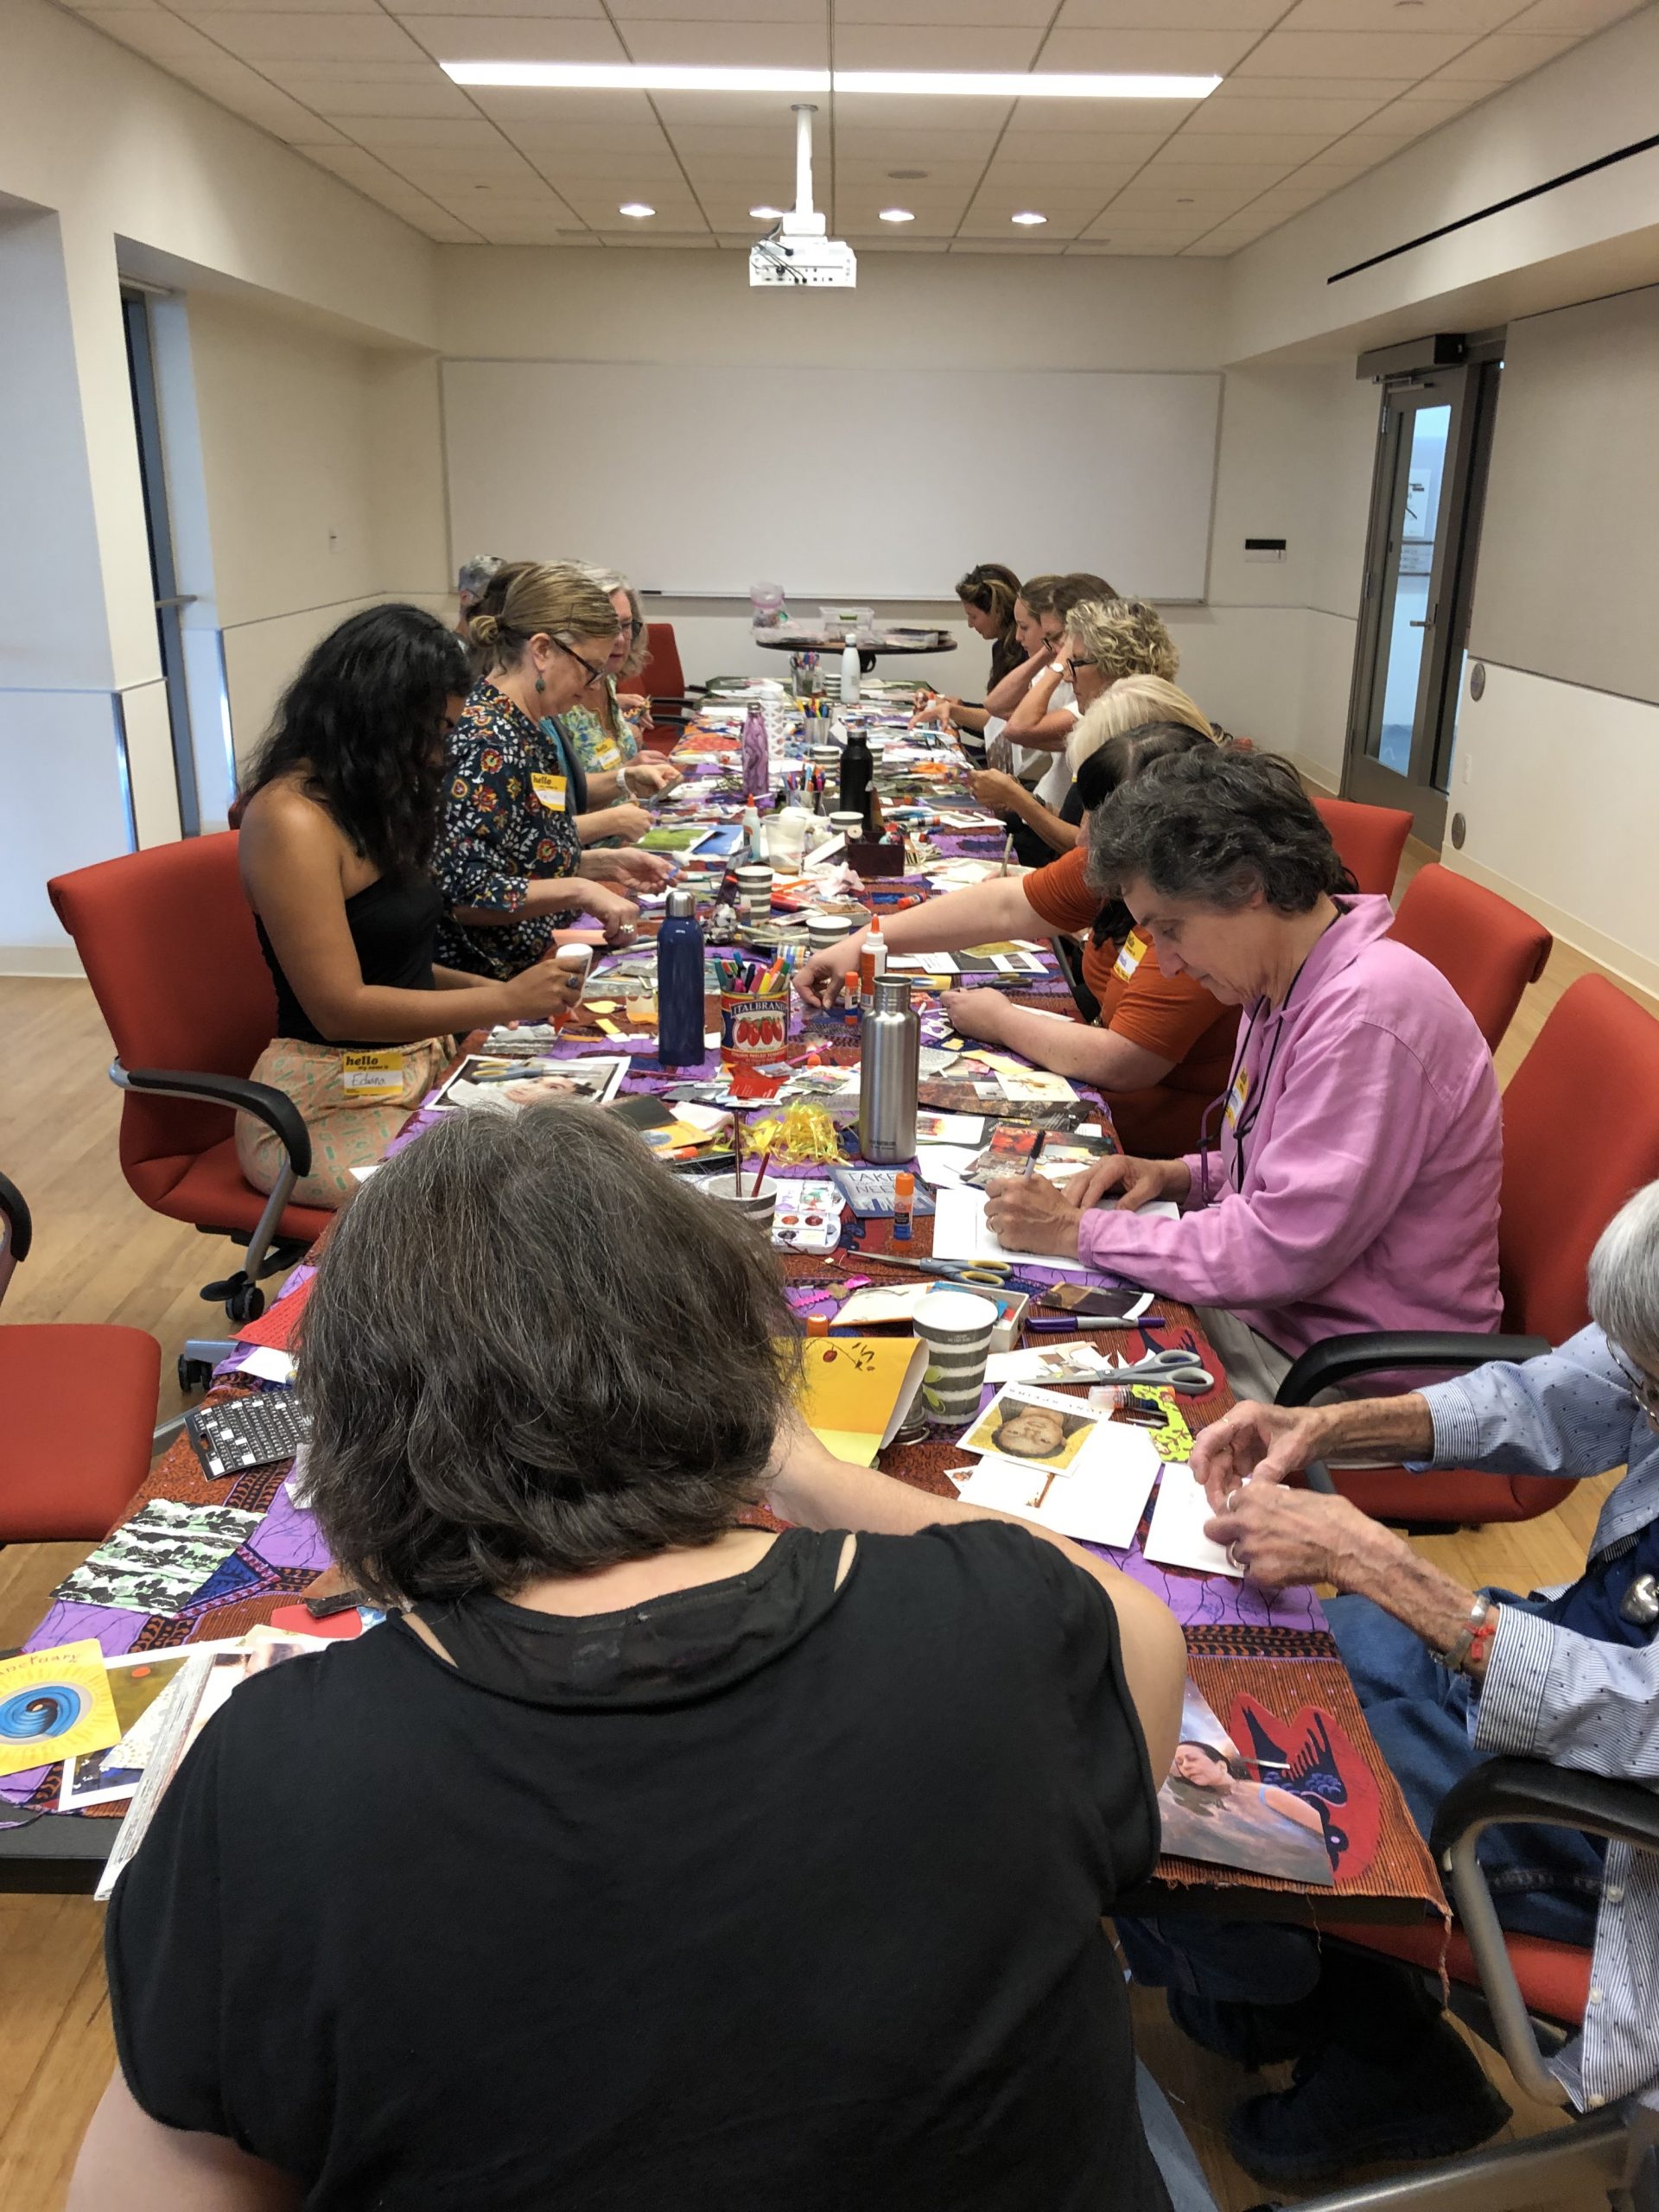 A group of women seated at a long conference table, making postcards with collage materials.